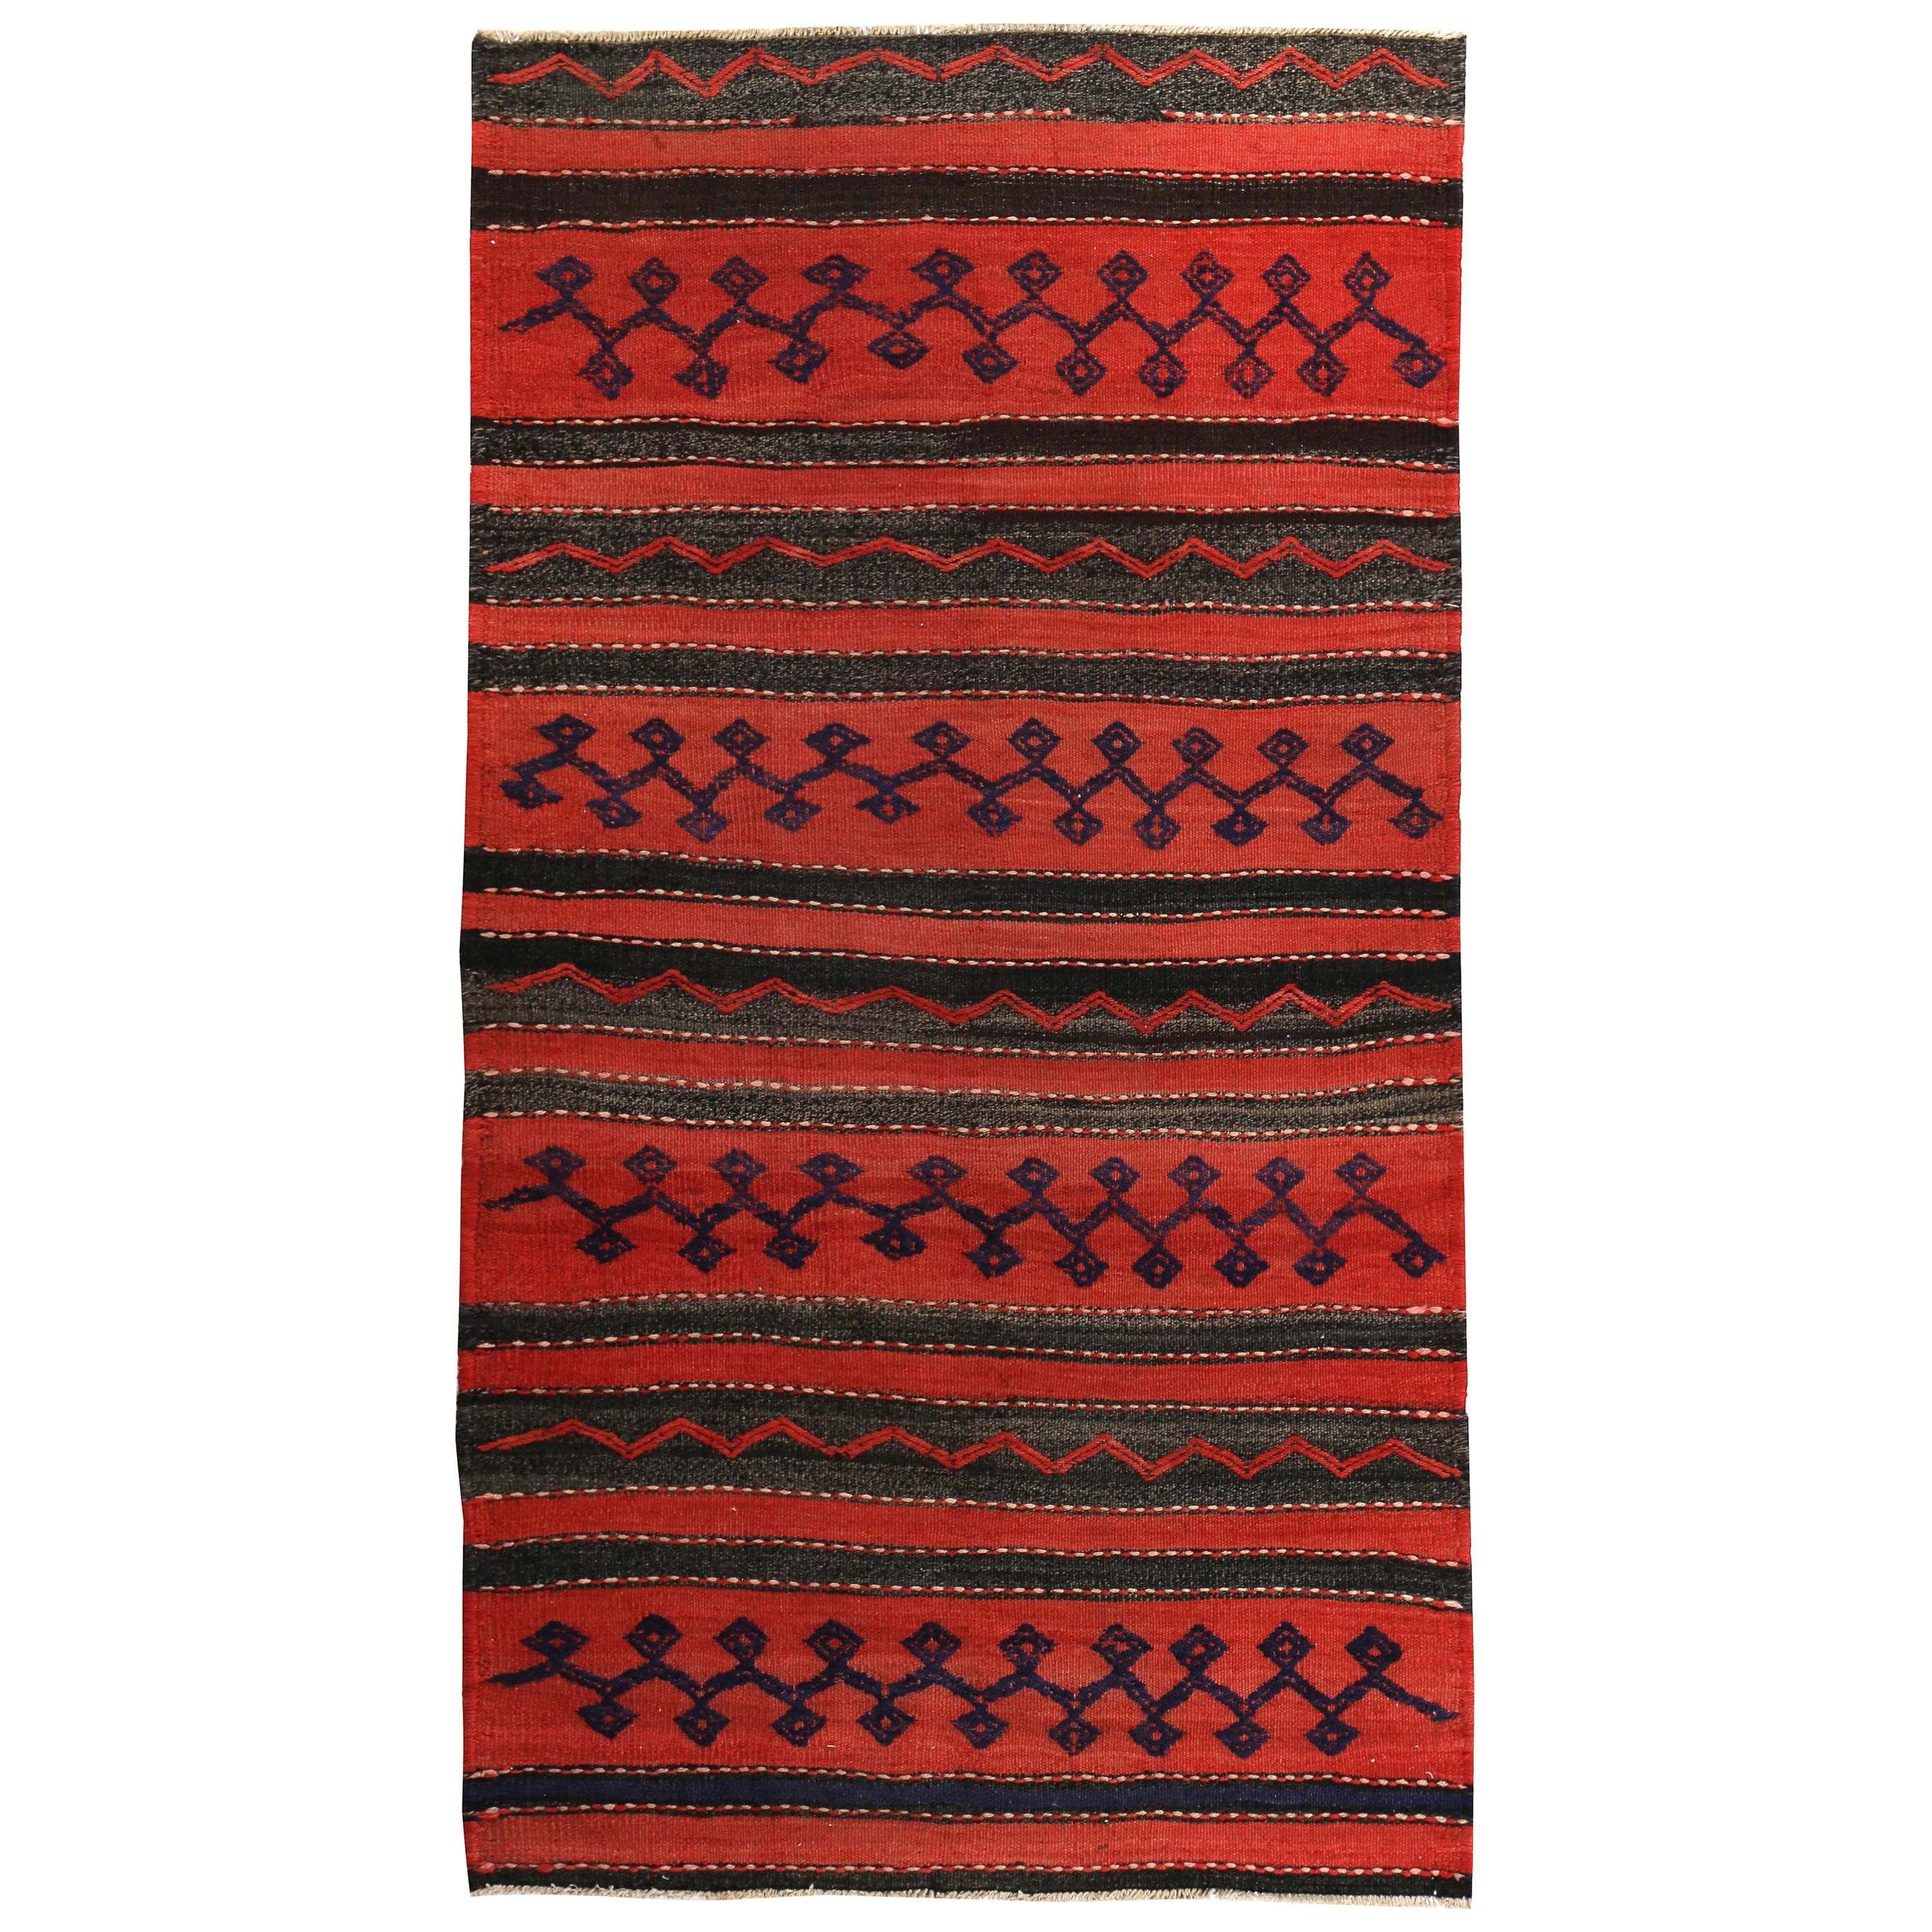 Turkish Kilim Rug in Red Black and Tribal Stripes in Navy For Sale